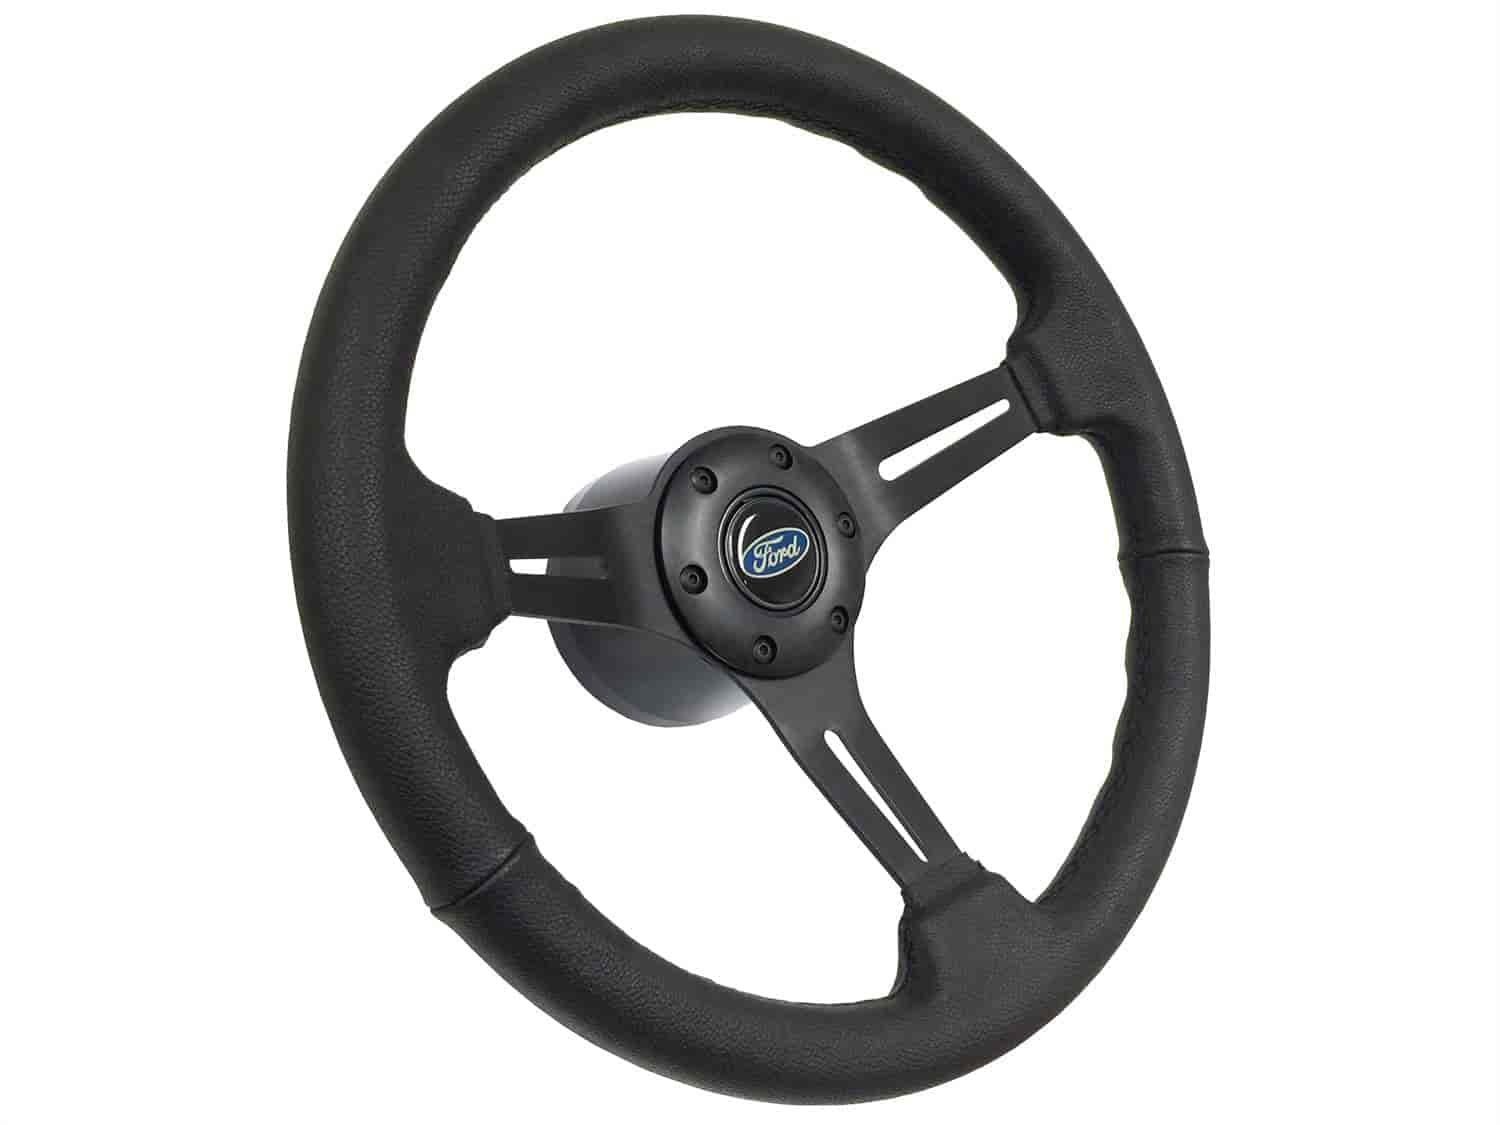 S6 Sport Steering Wheel Kit for 1968-1991 Ford/Mercury, 14 in. Diameter, Black Leather Grip, with 6-Bolt Adapter and Horn Button